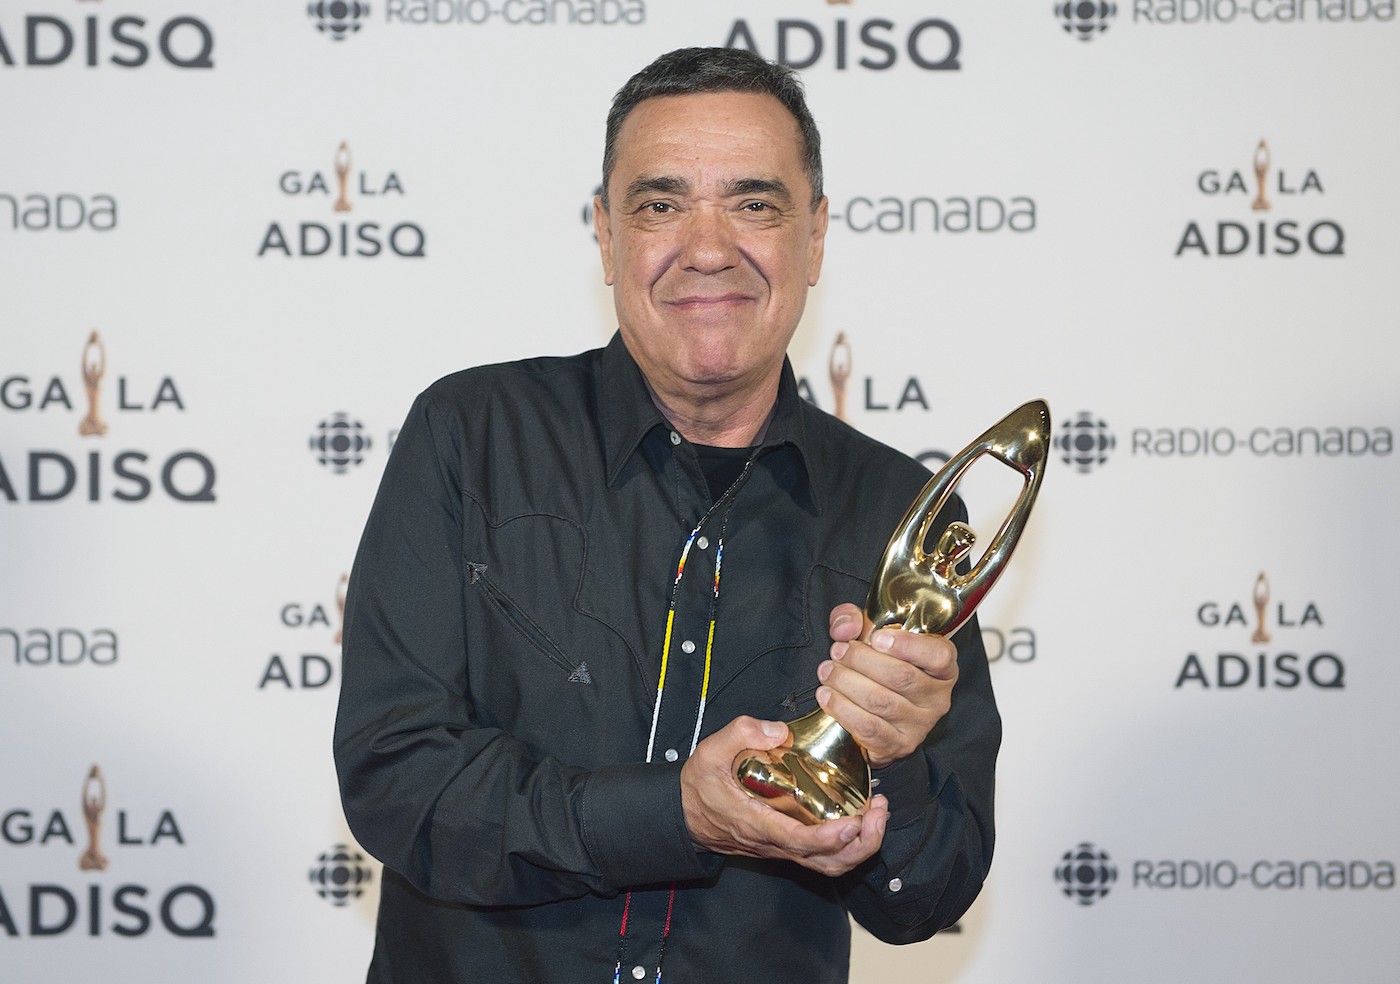 Florent Vollant holds up his award at the Gala Adisq awards ceremony in Montreal, Sunday, October 27, 2019.THE CANADIAN PRESS/Graham Hughes